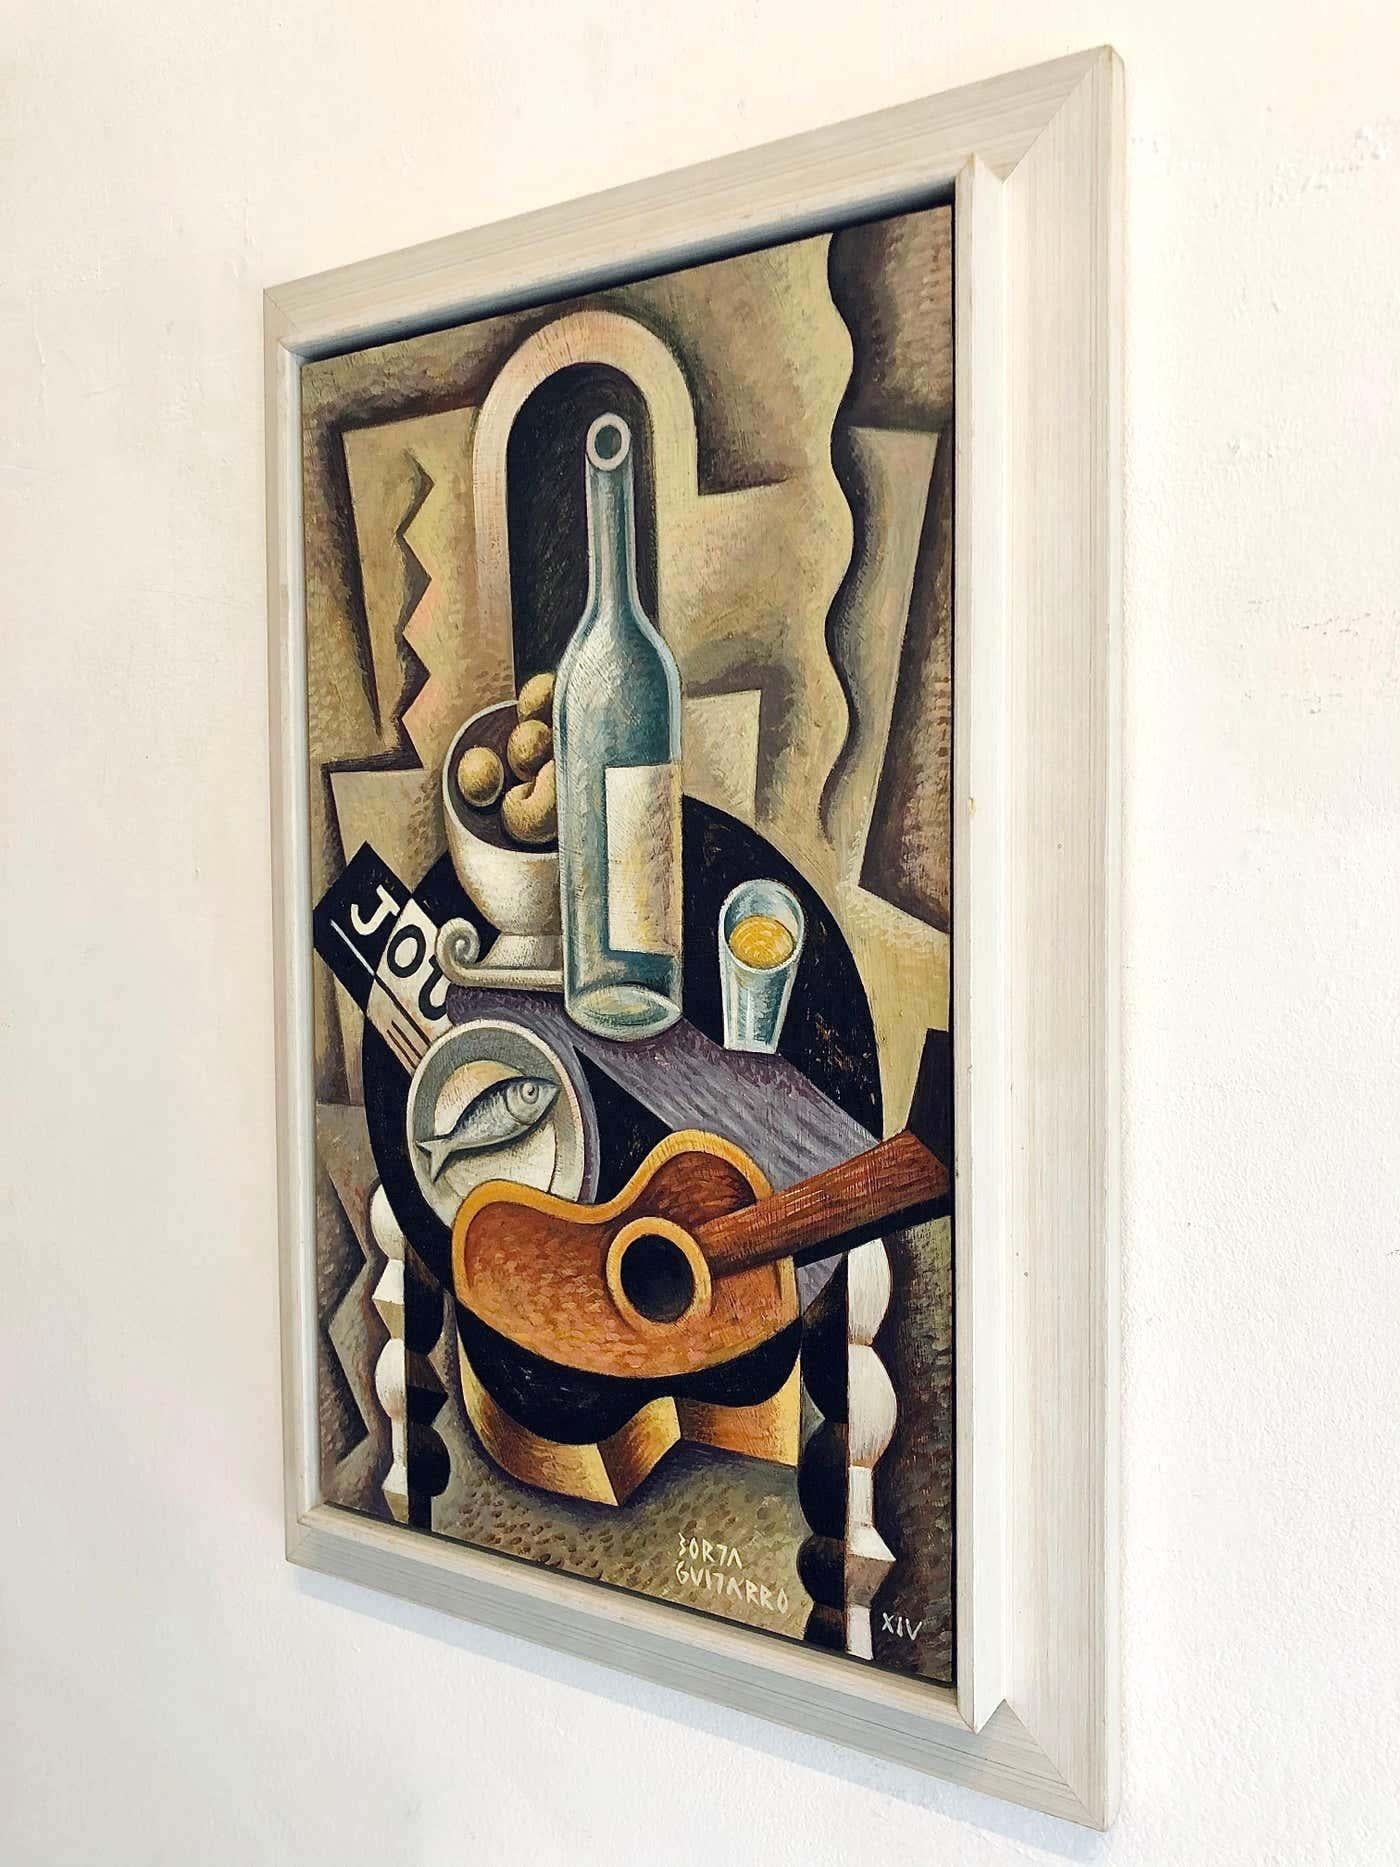 Still Life with guitar II-original cubism abstract painting-contemporary Art - Cubist Painting by Borja Guijarro